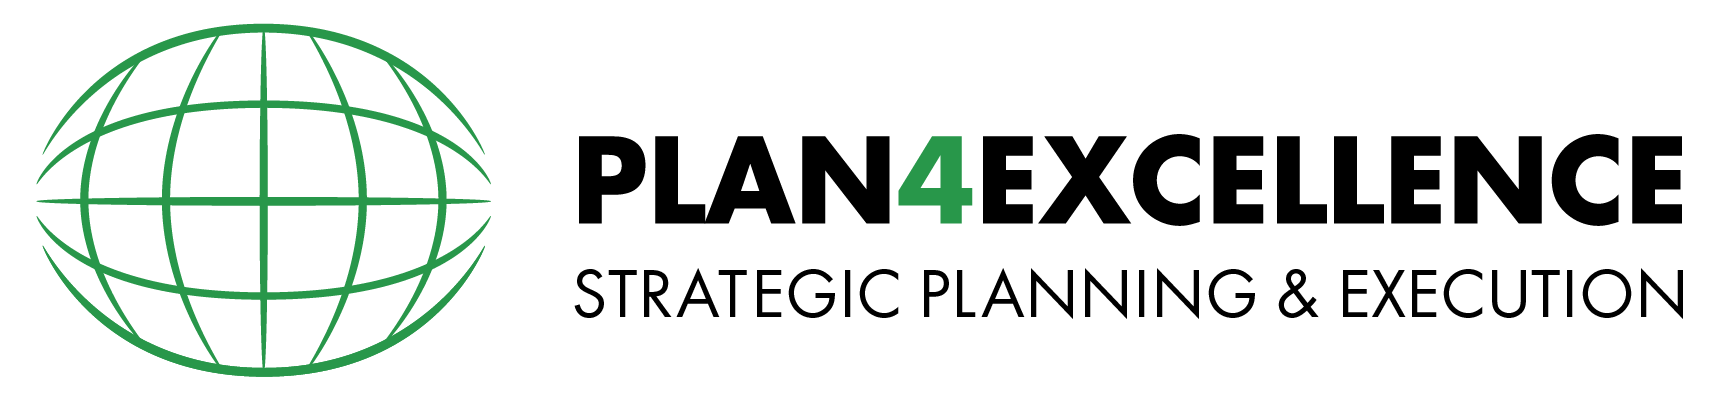 PLAN 4 EXCELLENCE